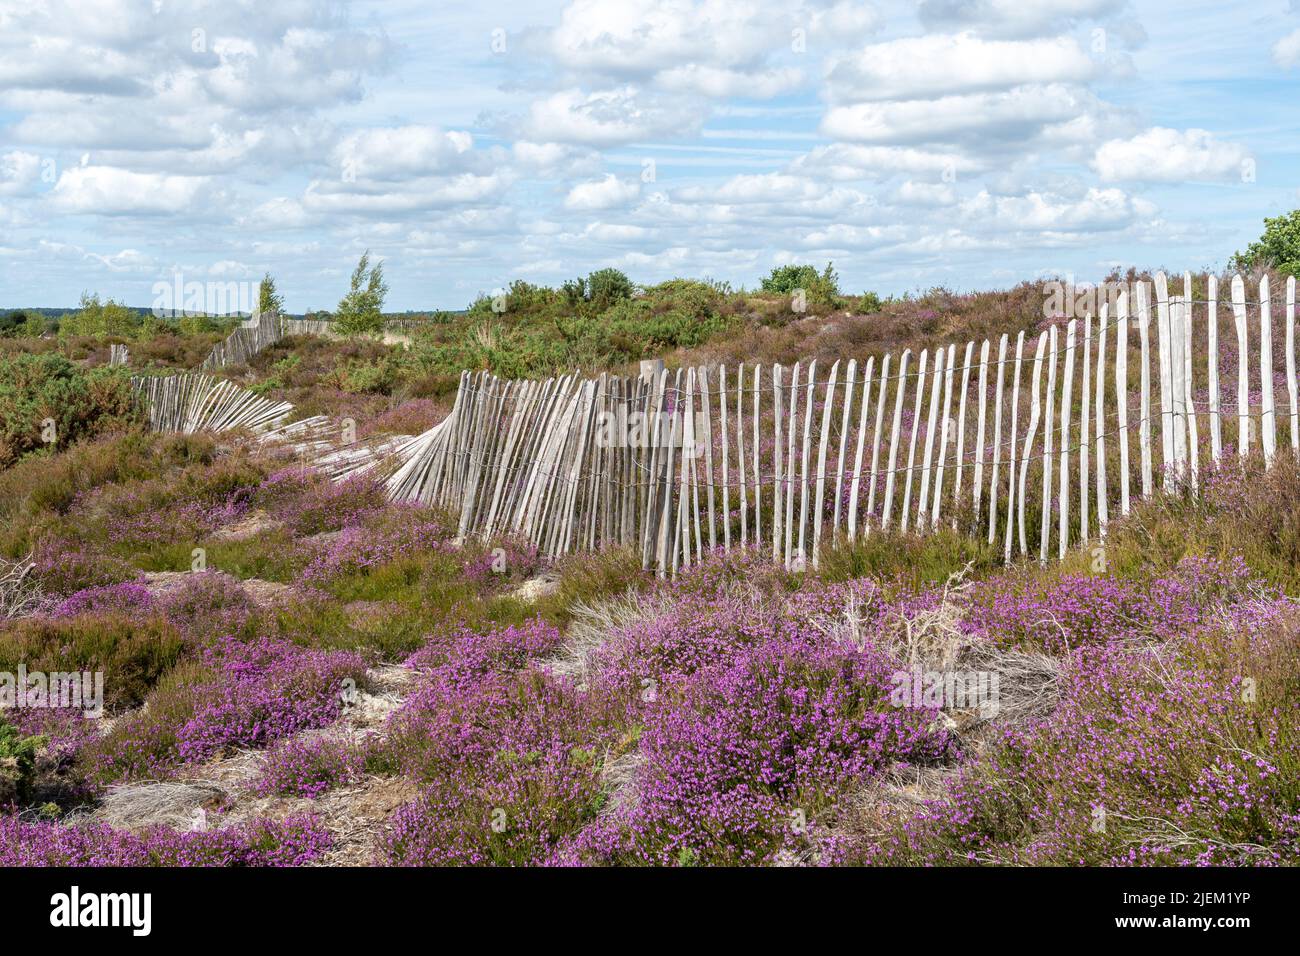 The Kings Ridge Barrows on Frensham Common, ancient burial mounds from the Bronze Age, Scheduled Ancient Monuments in Surrey, England, UK Stock Photo